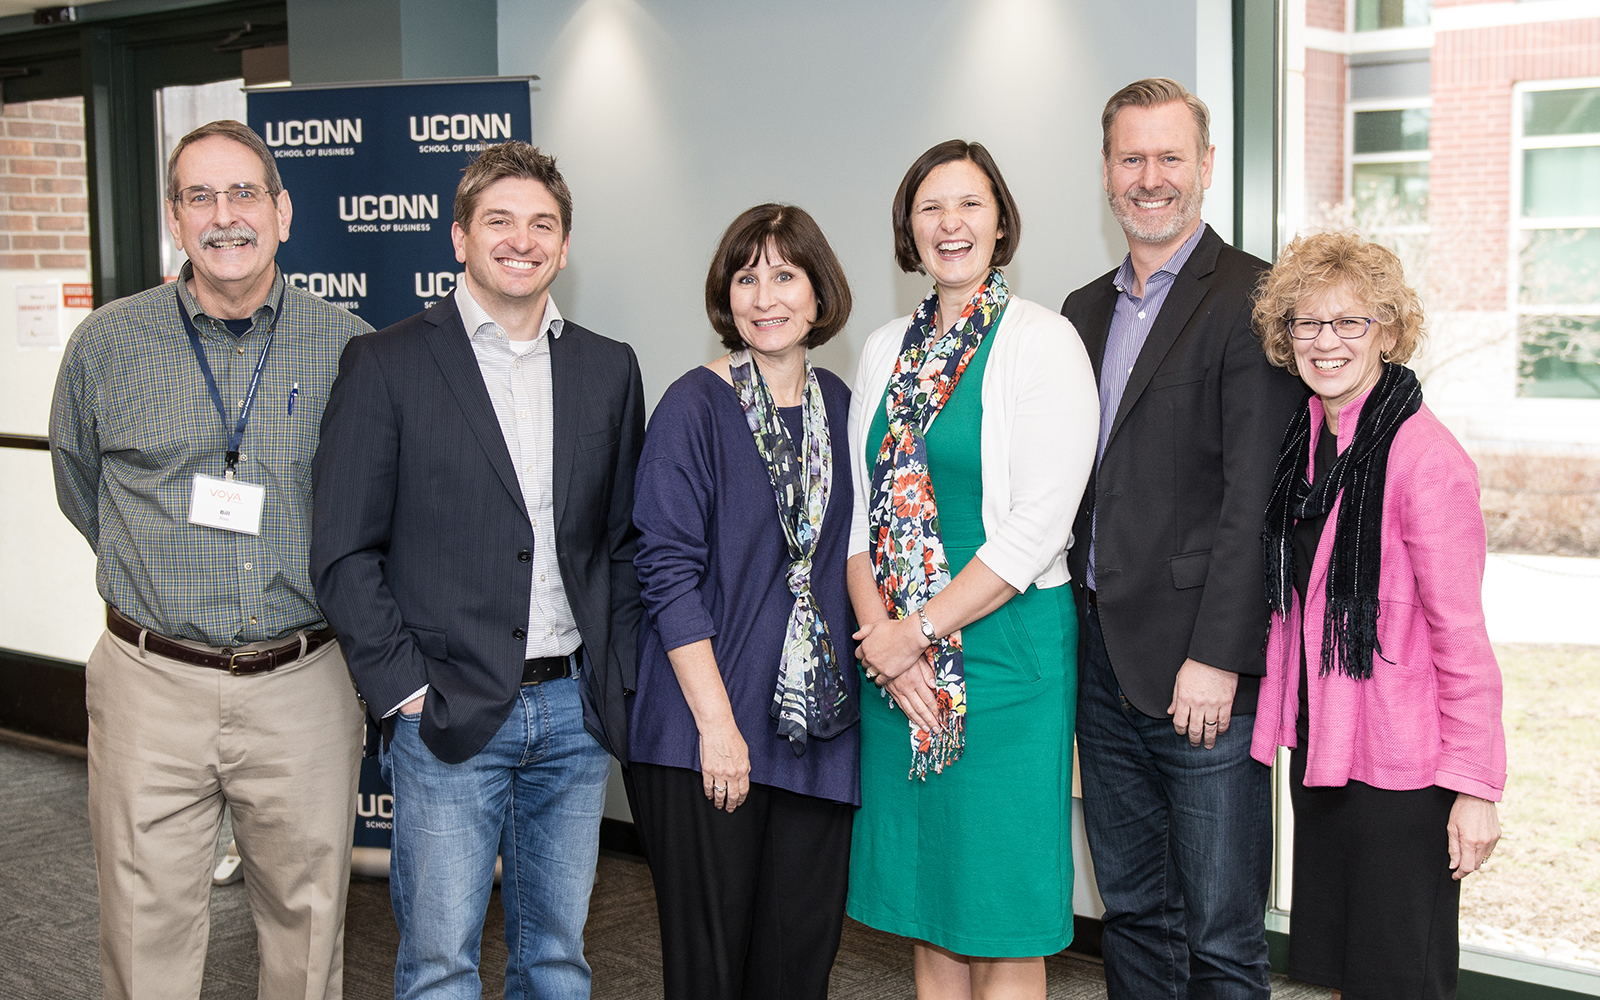 From left: Bill Ross, Remi Trudel, Jennifer Escalas, Karen Winterich, Mark Forehand, and Robin Coulter (Nathan Oldham/UConn School of Business)